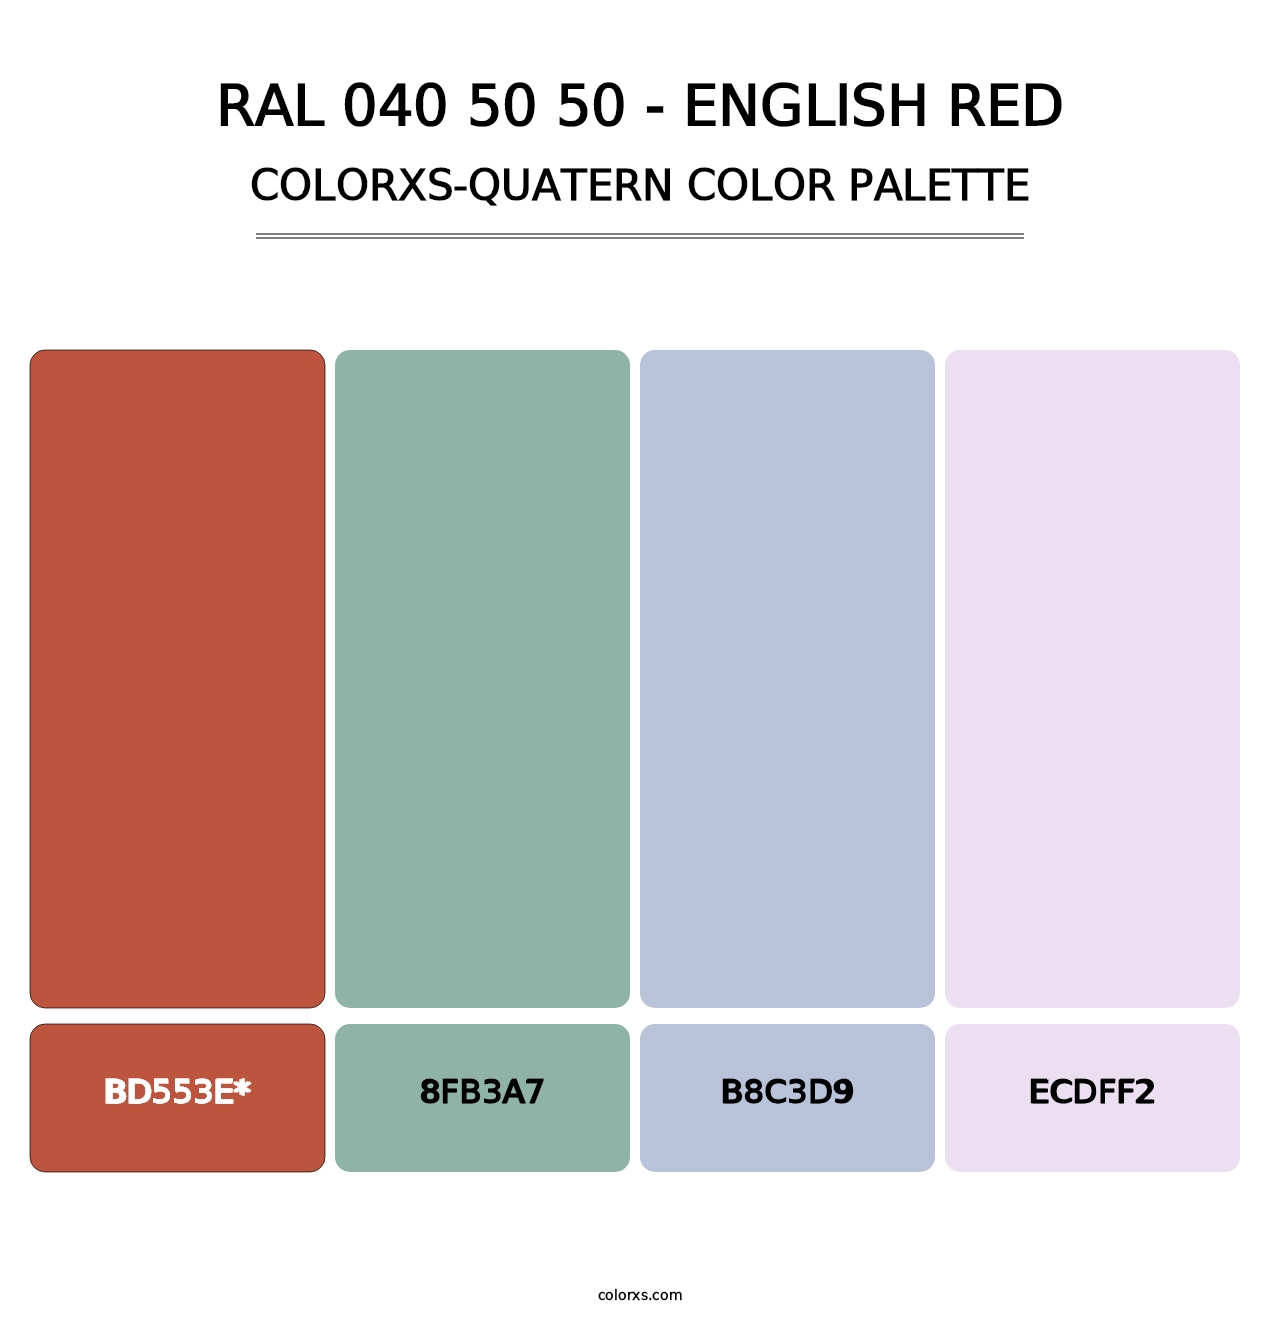 RAL 040 50 50 - English Red - Colorxs Quatern Palette